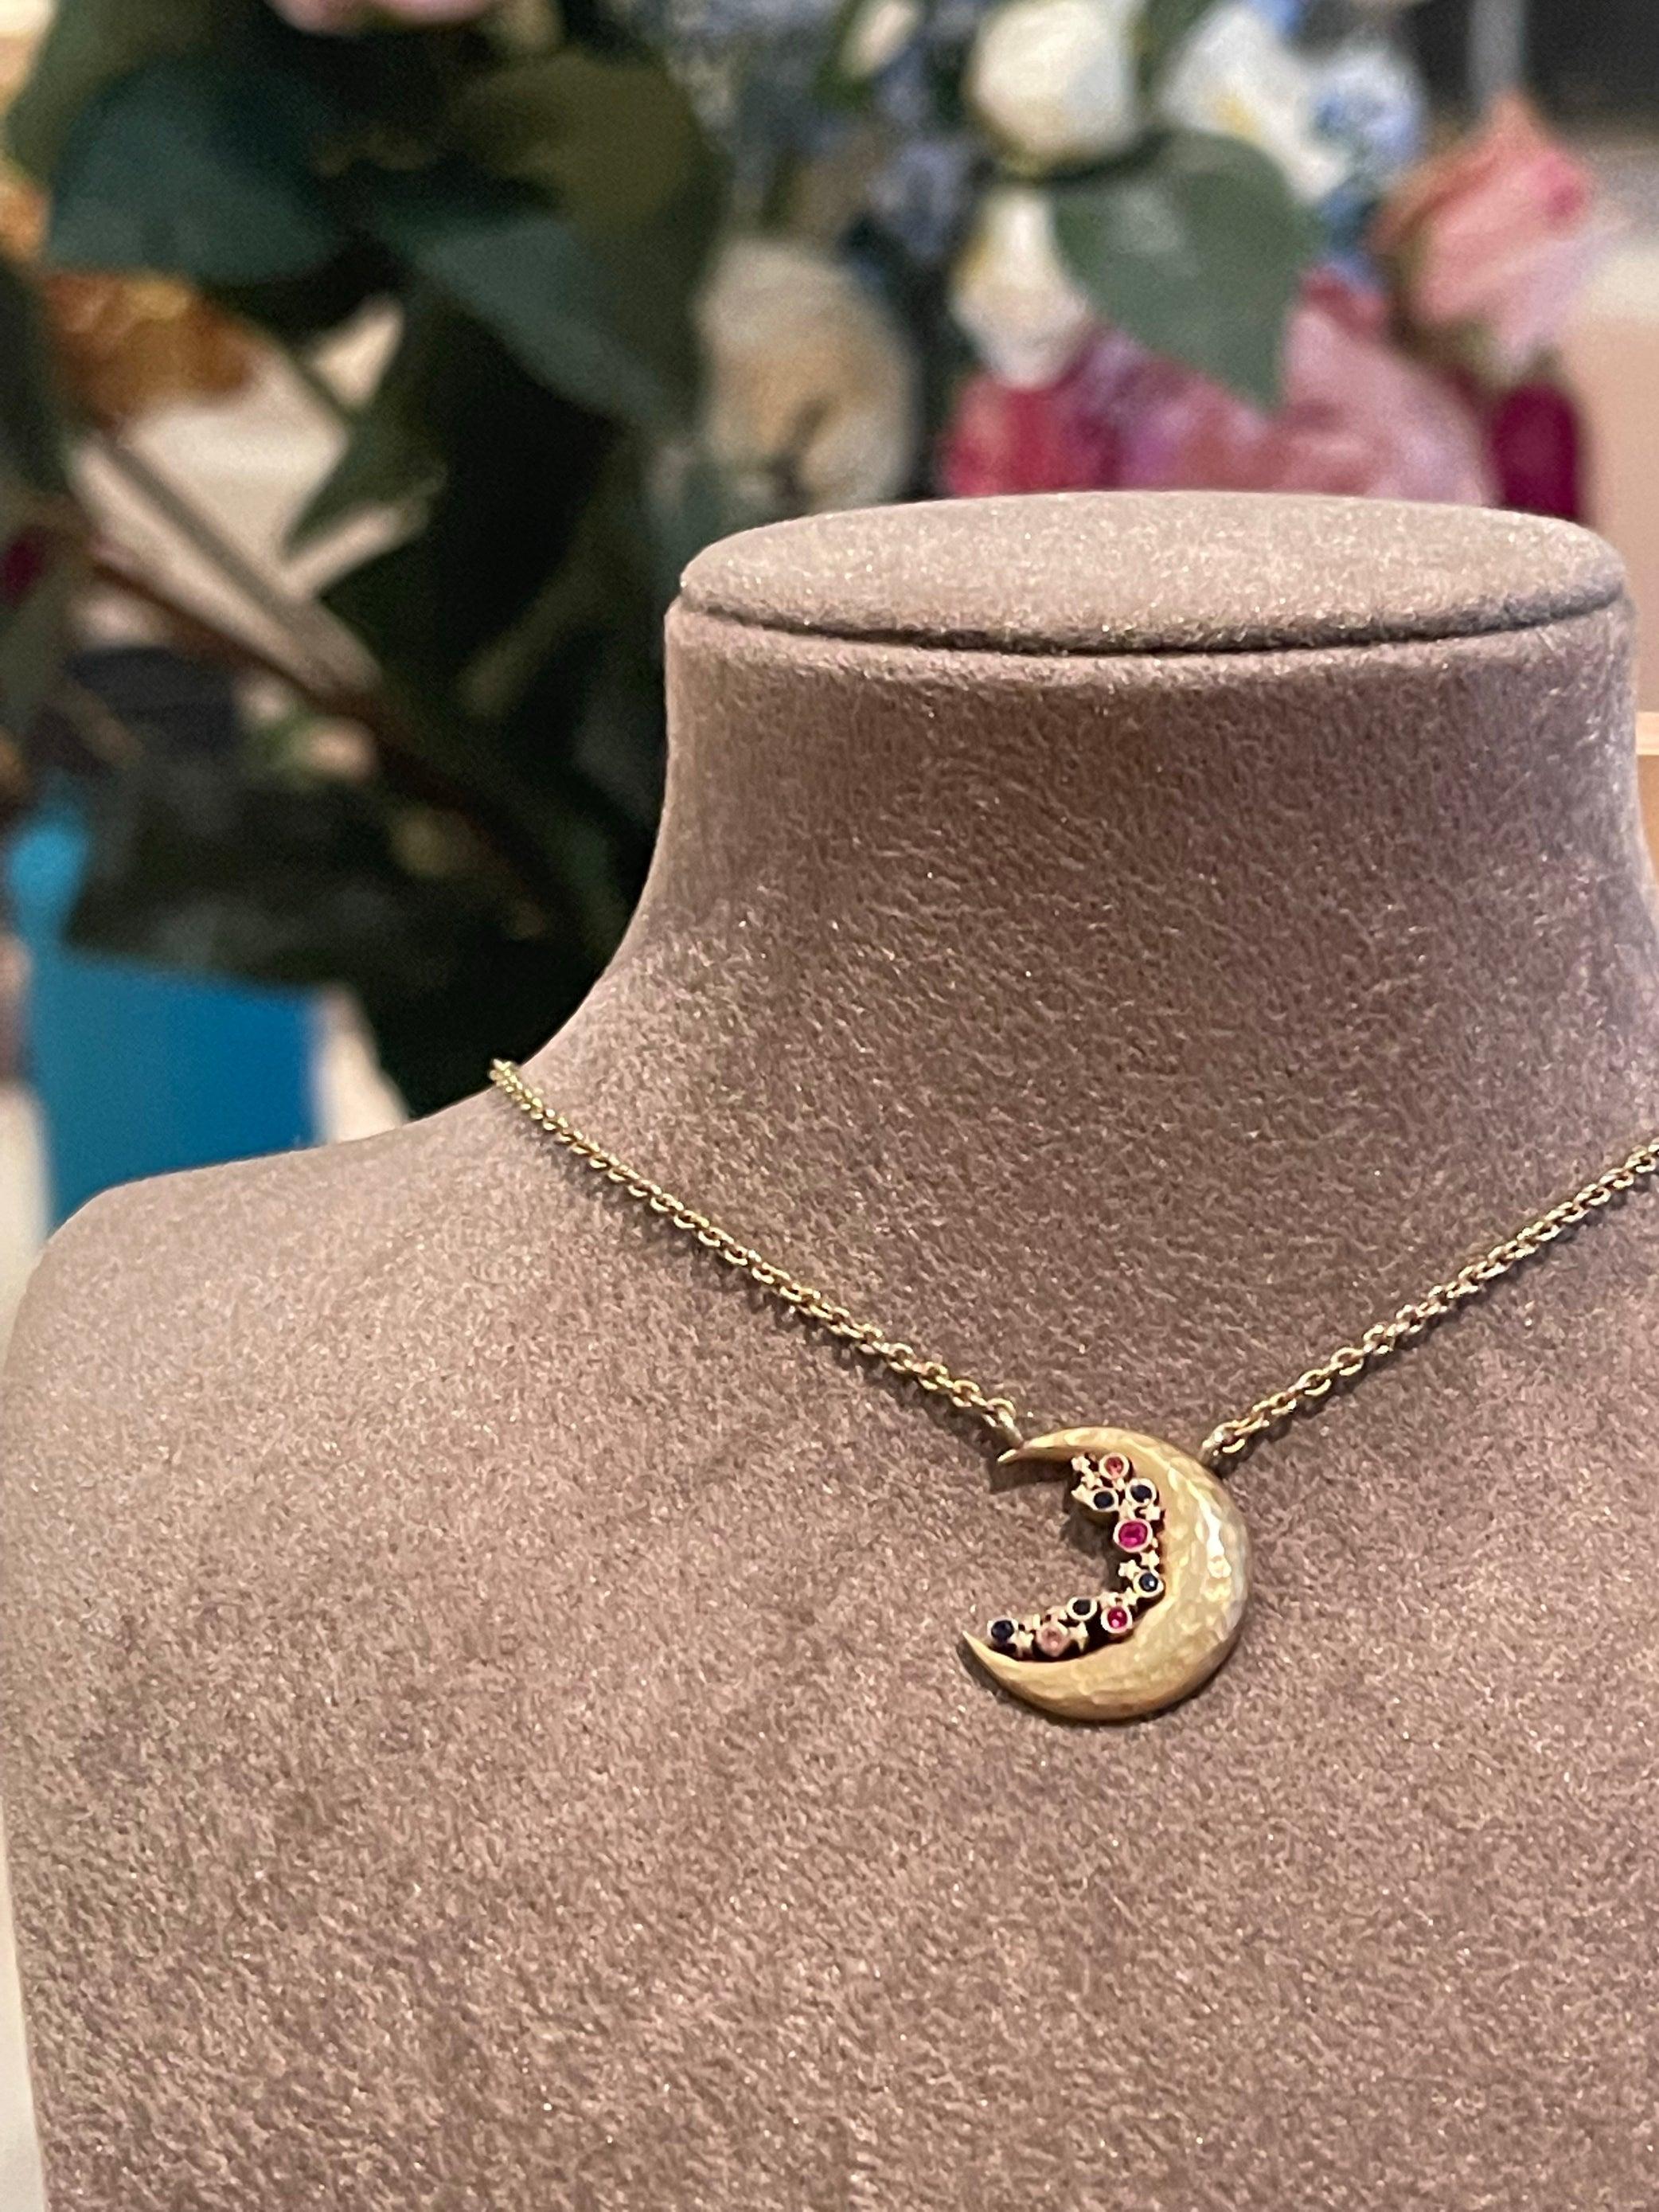 A stunning 14K gold moon crescent necklace with multicolor  sapphires and stars which is part of the Celeste constellation jewellery series. 

In Ancient Greece the moon was personified as the goddess Selene. Her parents were Titans Hyperion and